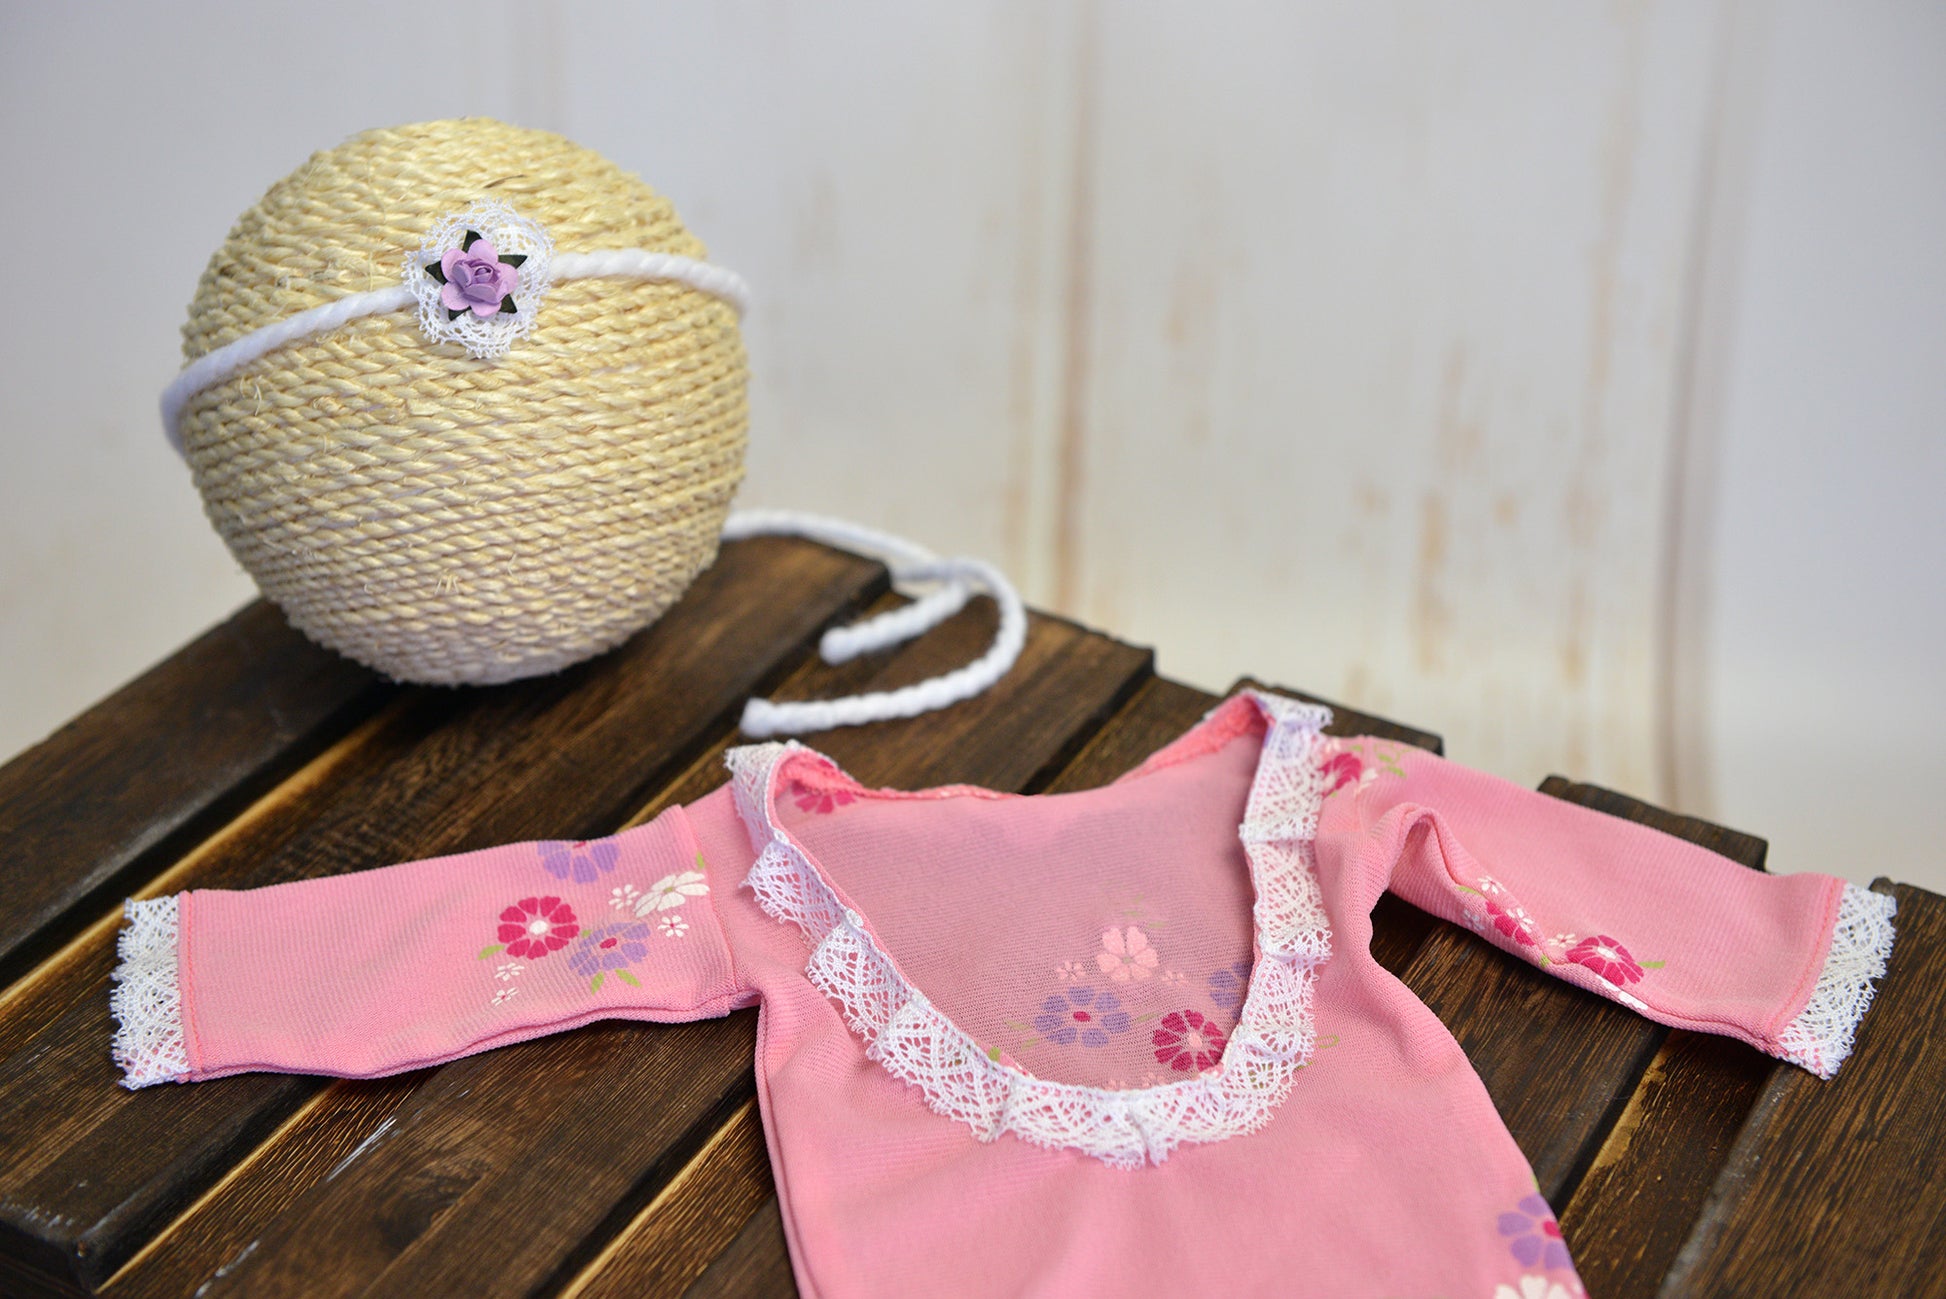 SET Bodysuit and Headband - Floral Pink-Newborn Photography Props